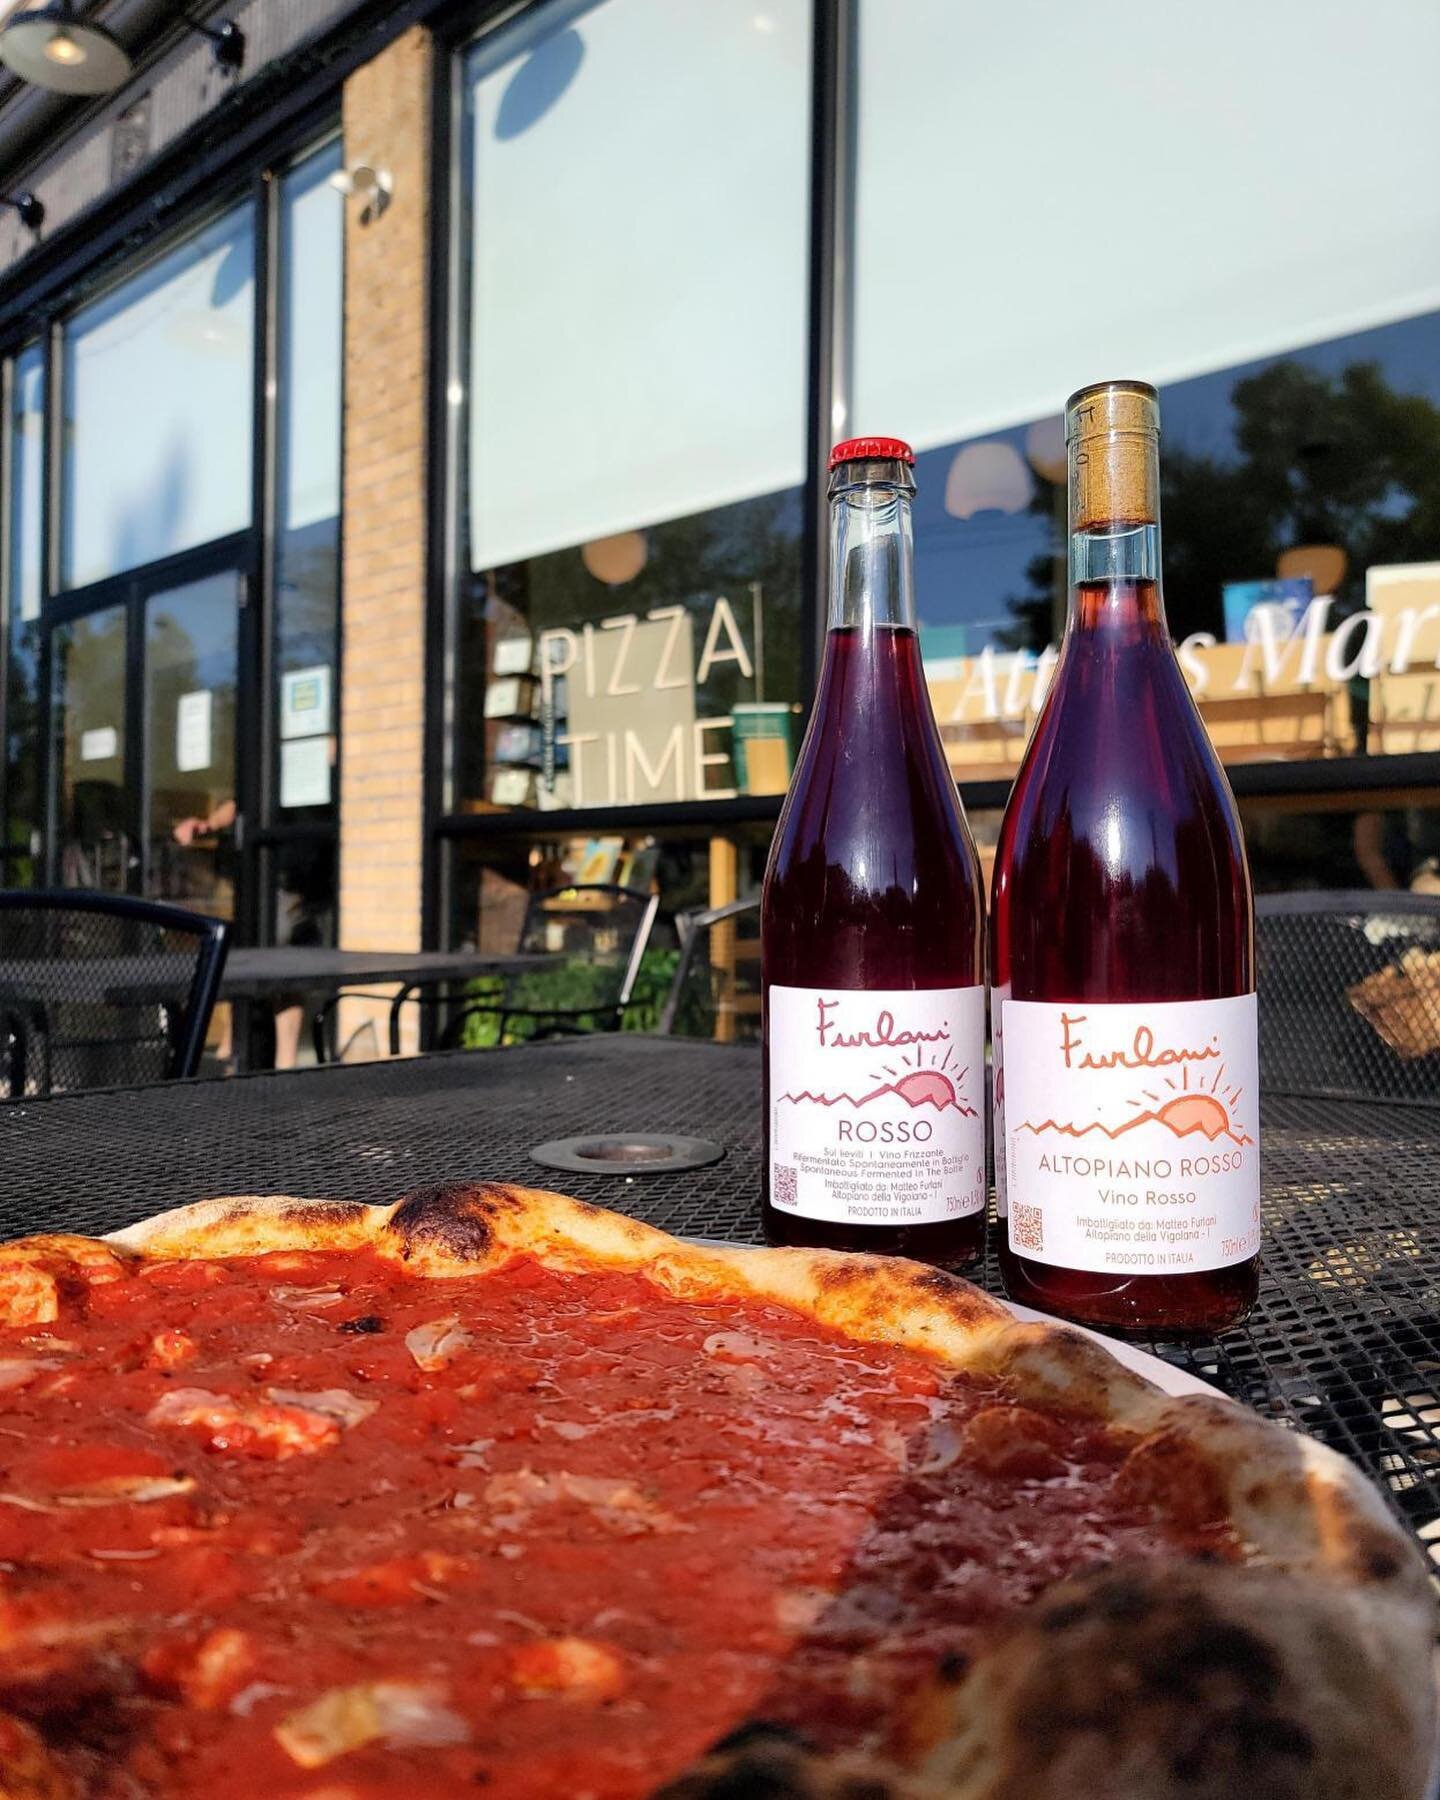 One Atticus has pizza, the other Atticus has wine (including these recently-arrived super-crushable wines from Furlani).

If you're trying to get some steps in and then reward yourself, may we suggest picking up some wine downtown, placing an order f